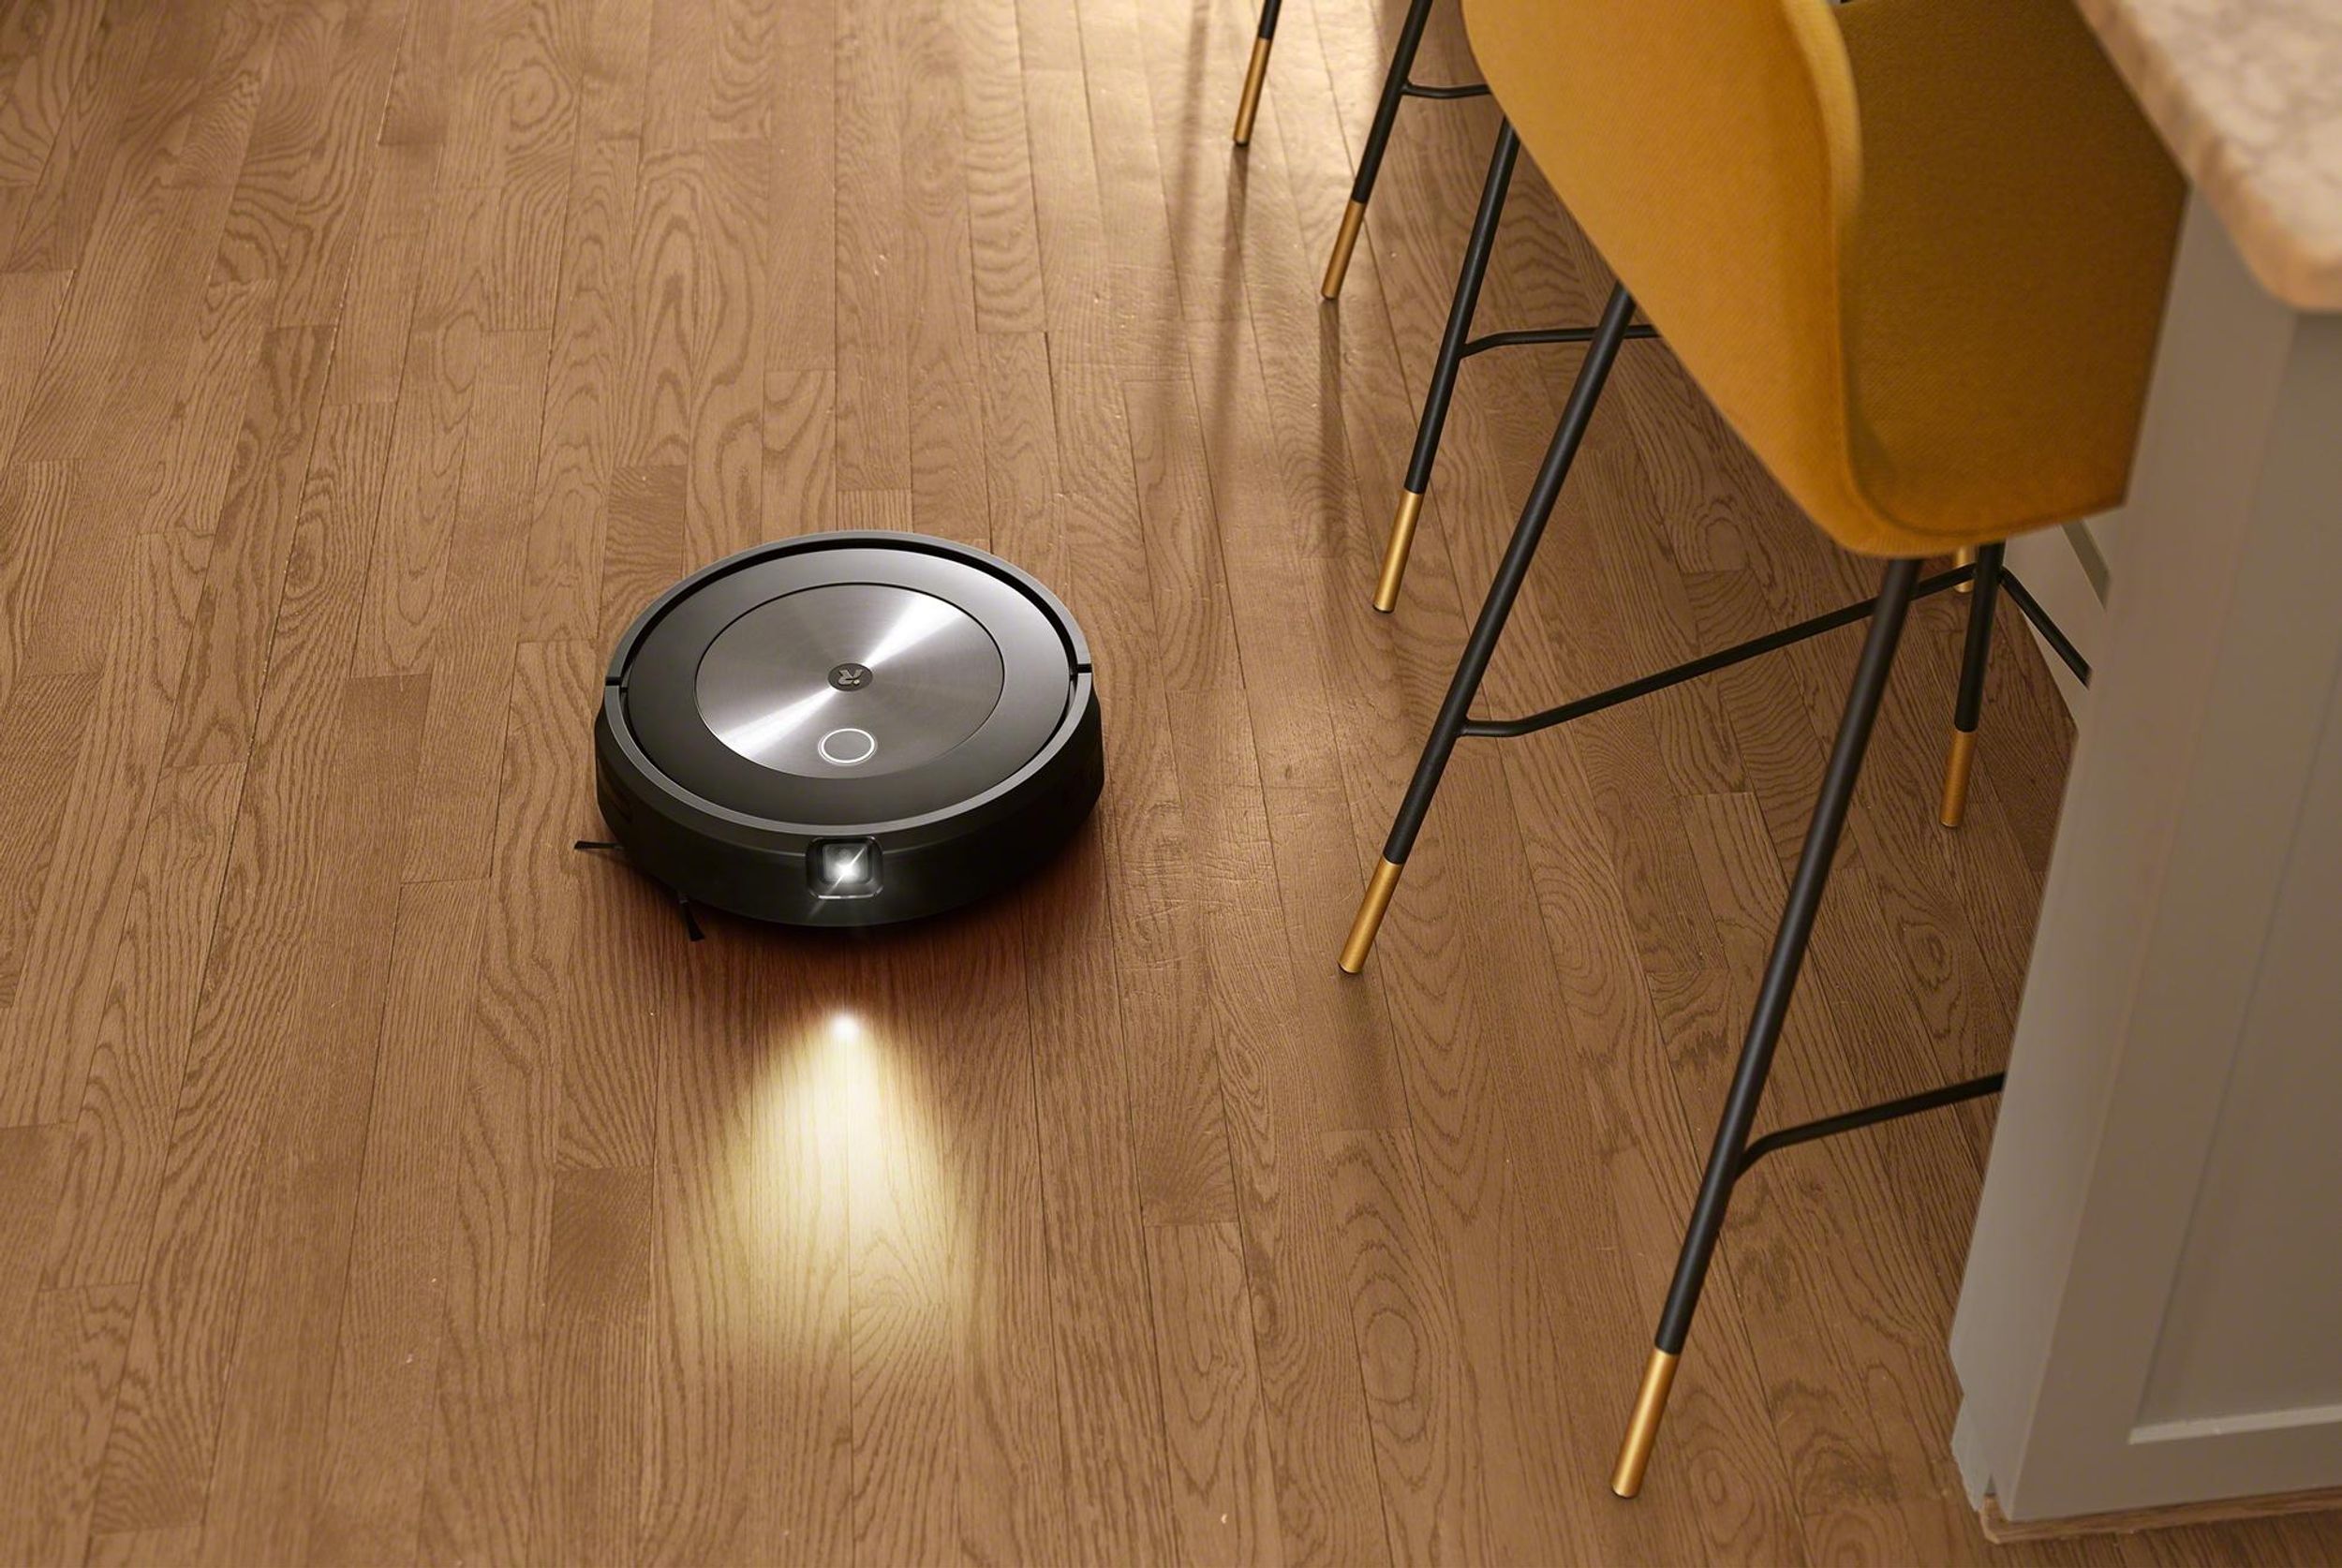 New iRobot j7 with front-facing camera and led light vacuuming a kitchen floor